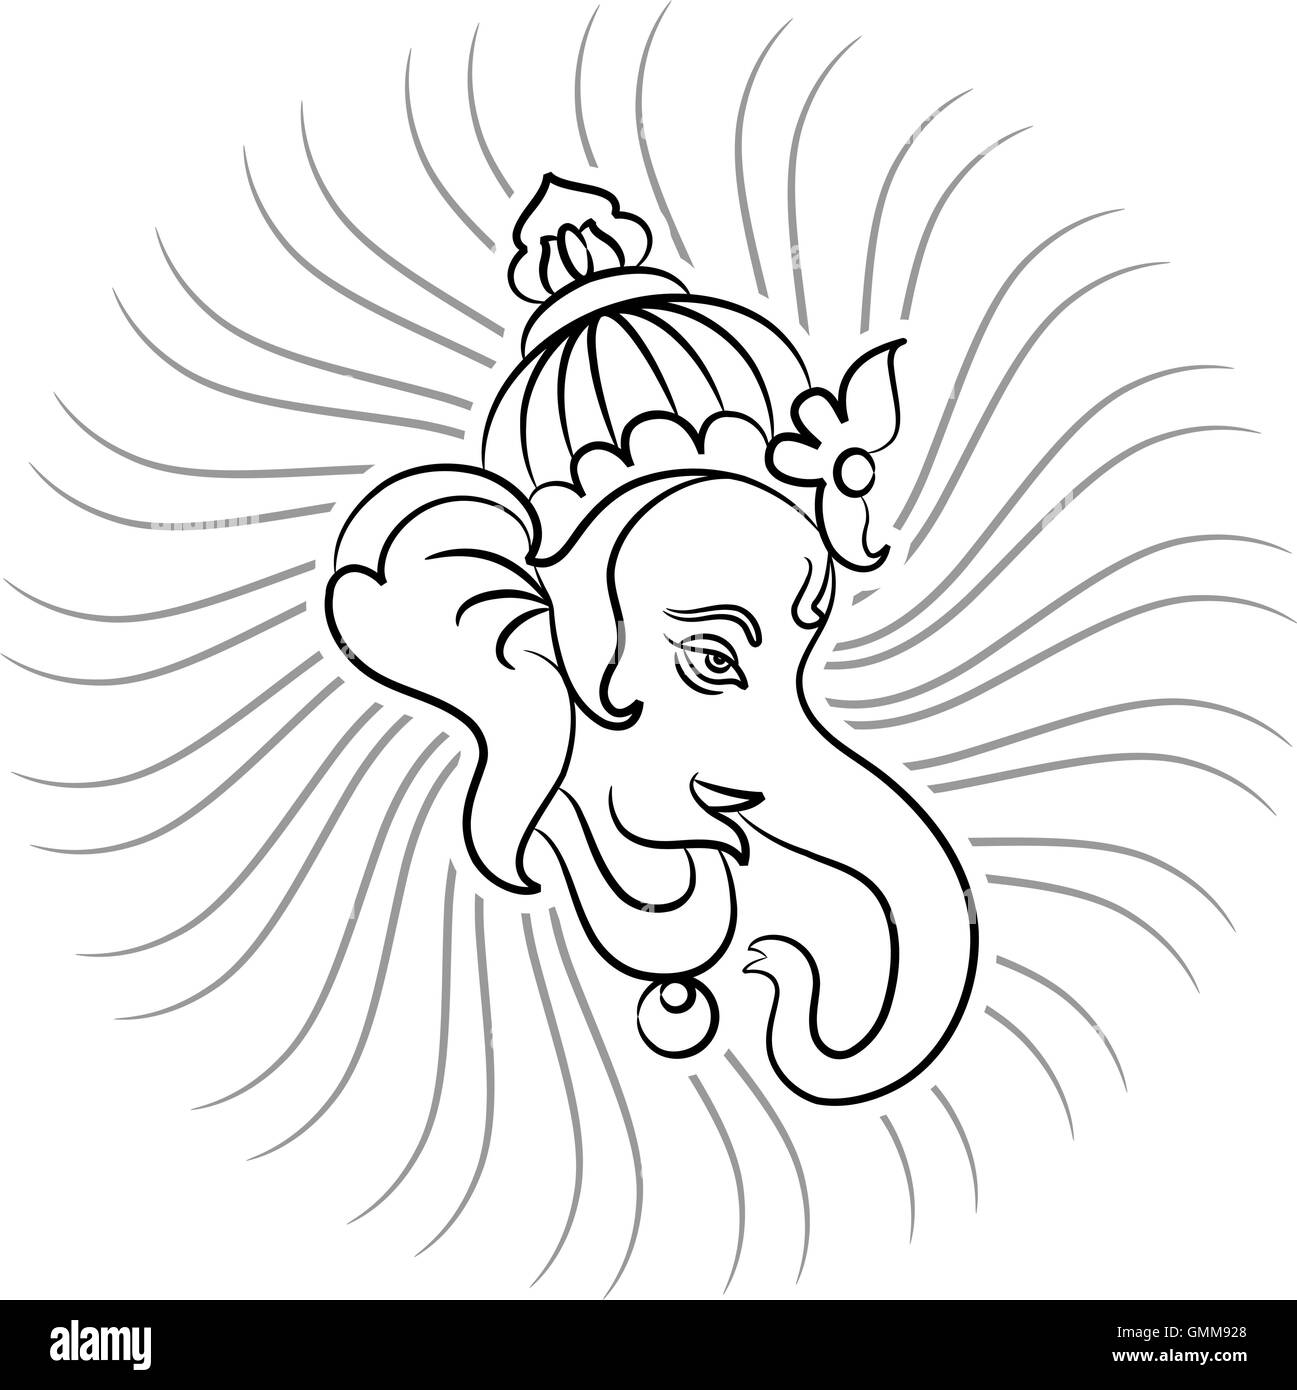 Lord Ganpati Face Illustration in FIGMA by Vishal Chander on Dribbble